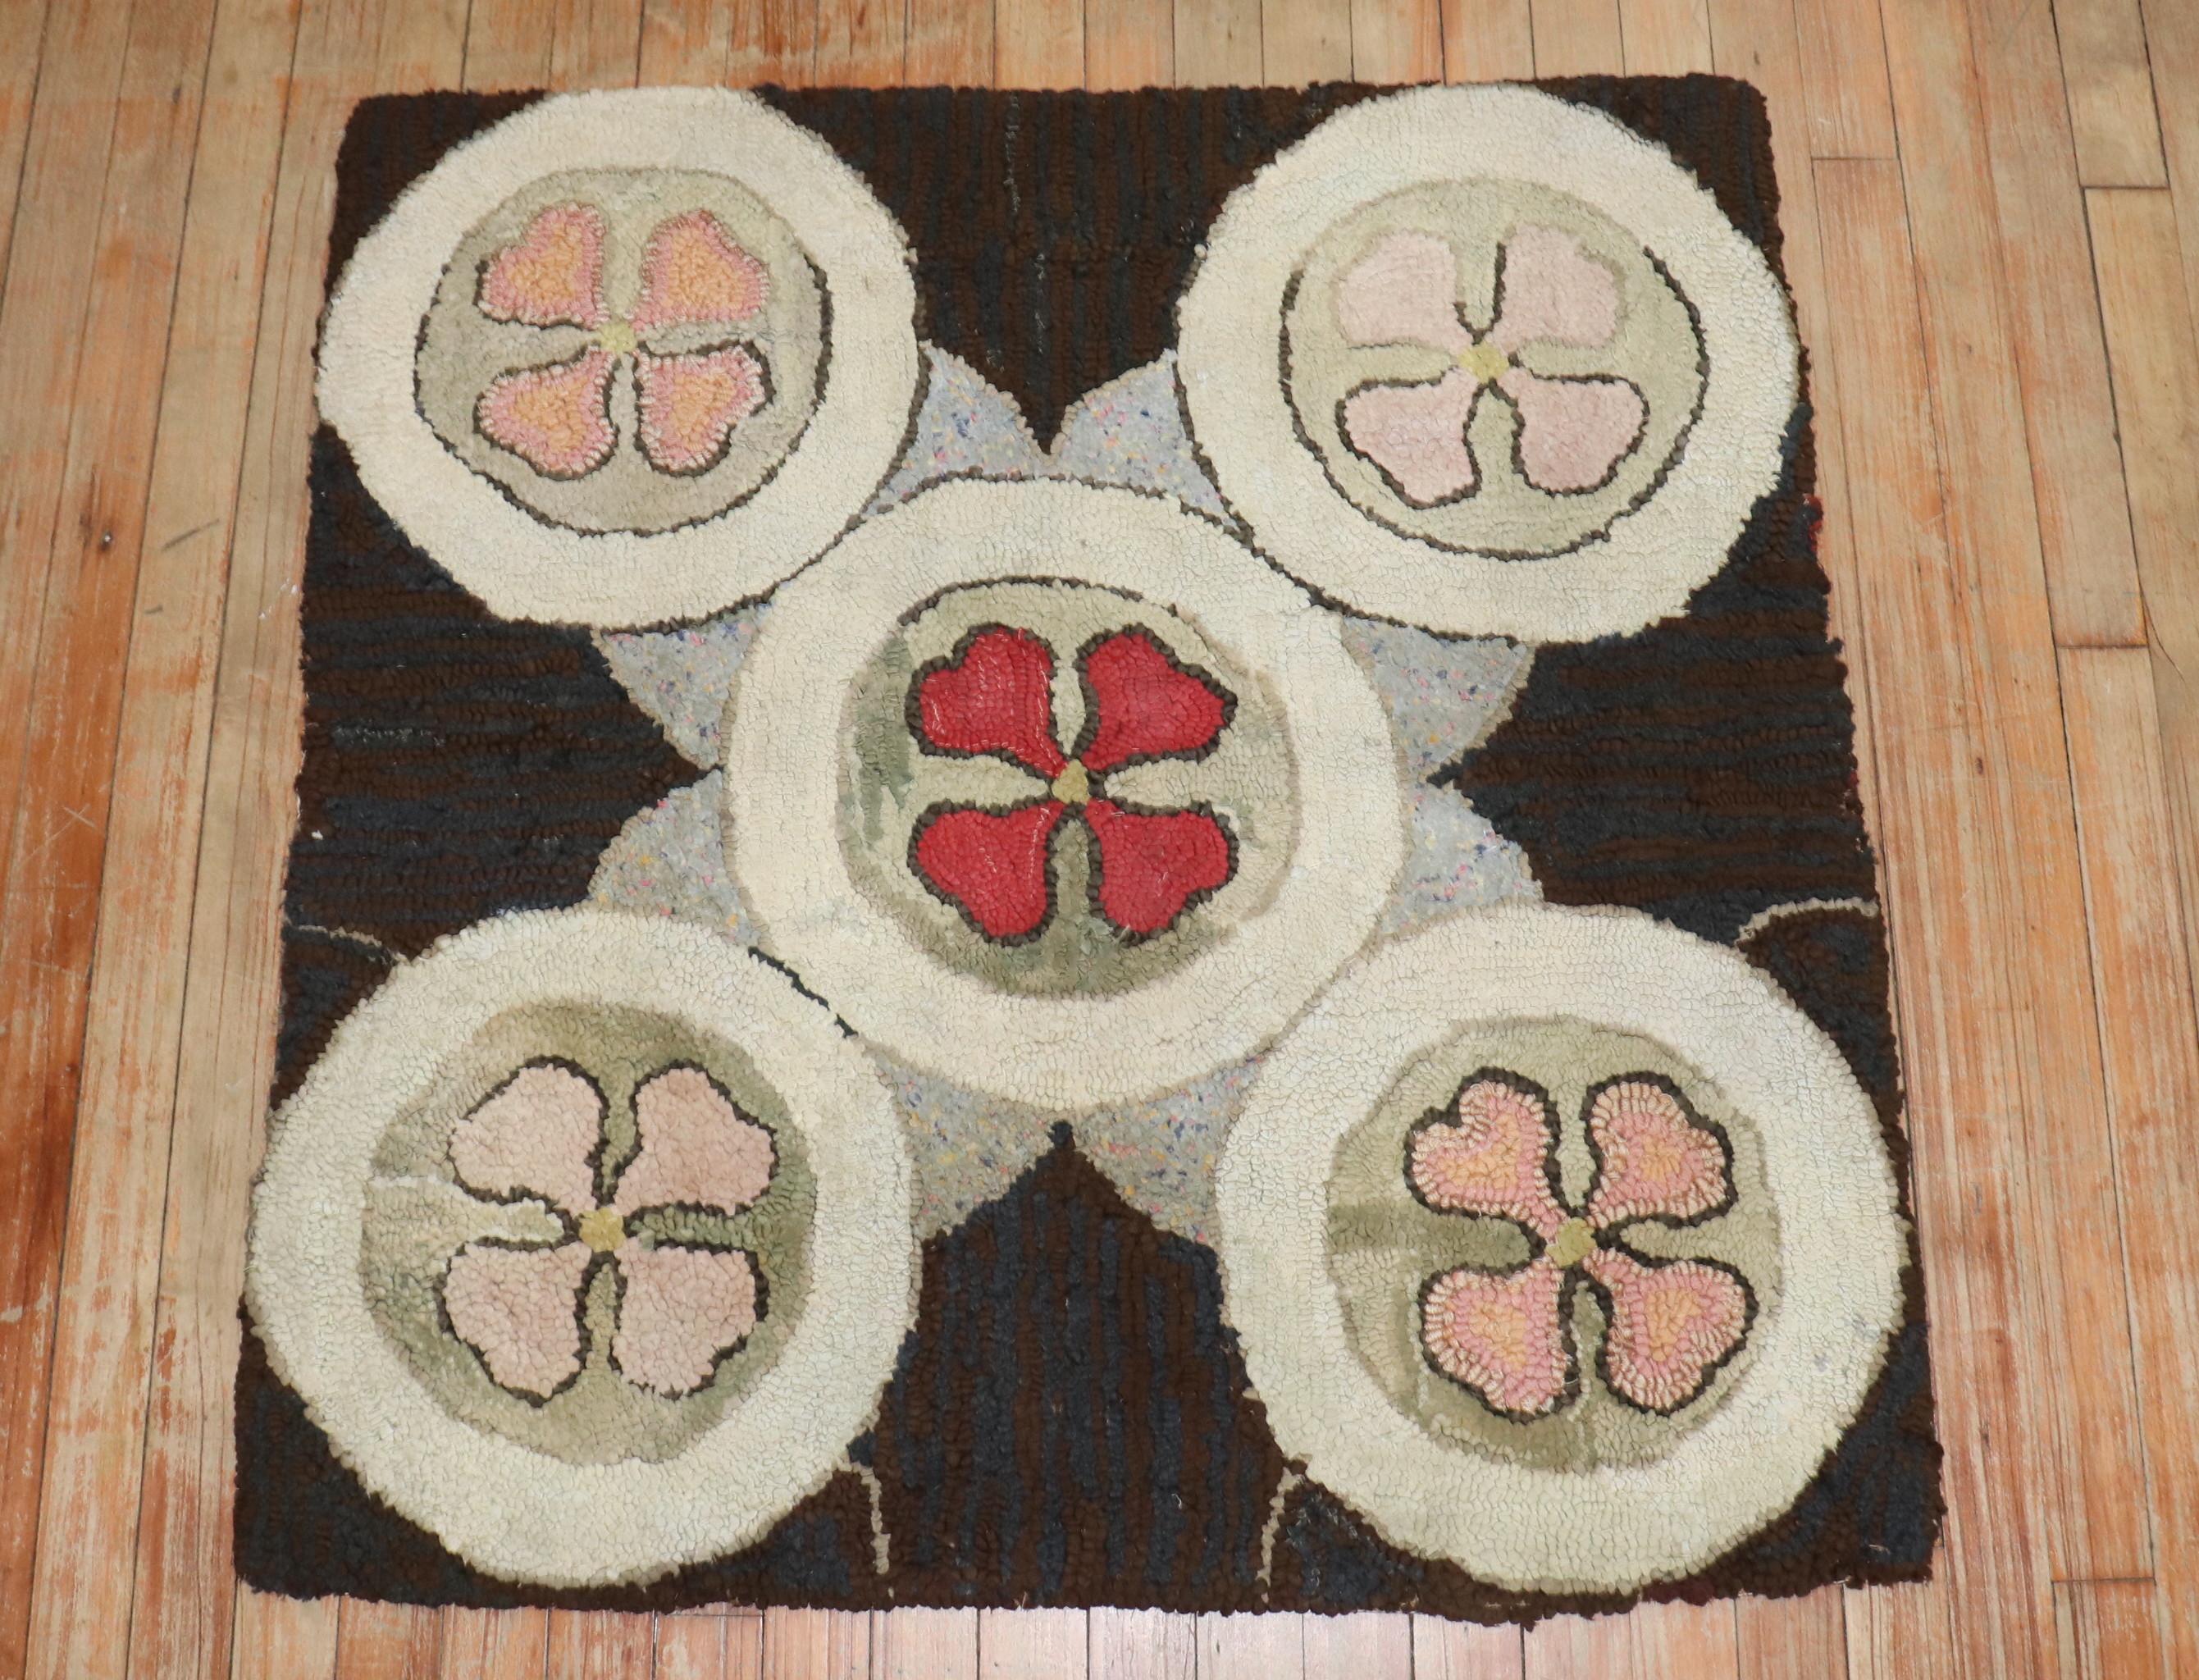 square size early 20th Century American Hooked Rug

Measures: 3' x 3'